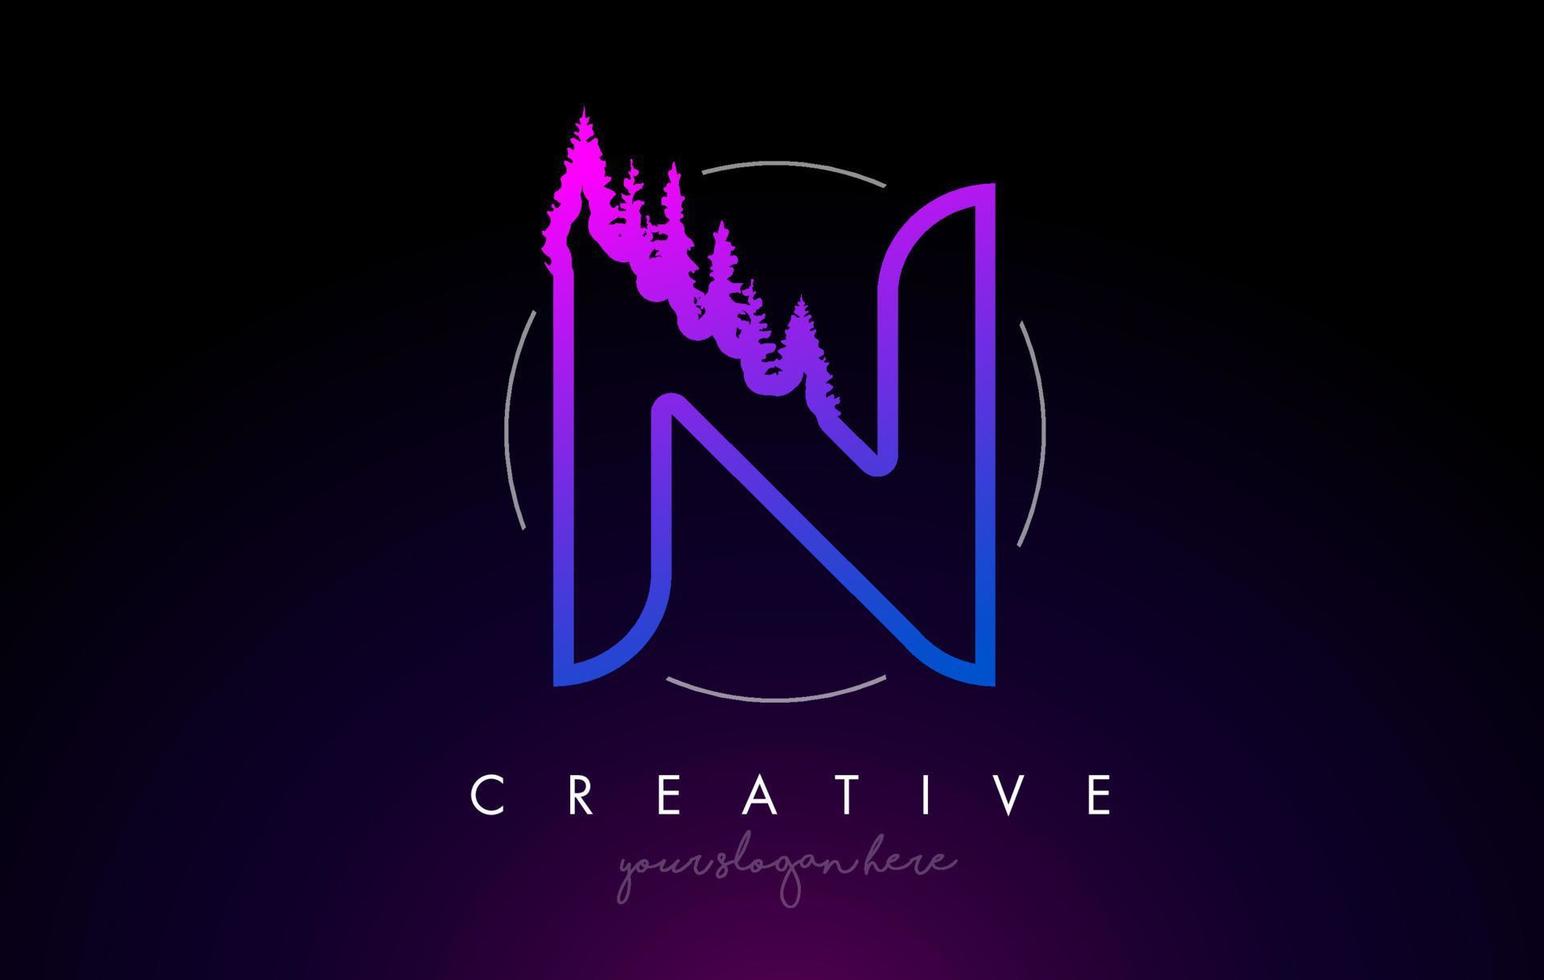 Creative N Letter Logo Idea With Pine Forest Trees. Letter N Design With Pine Tree on Top vector